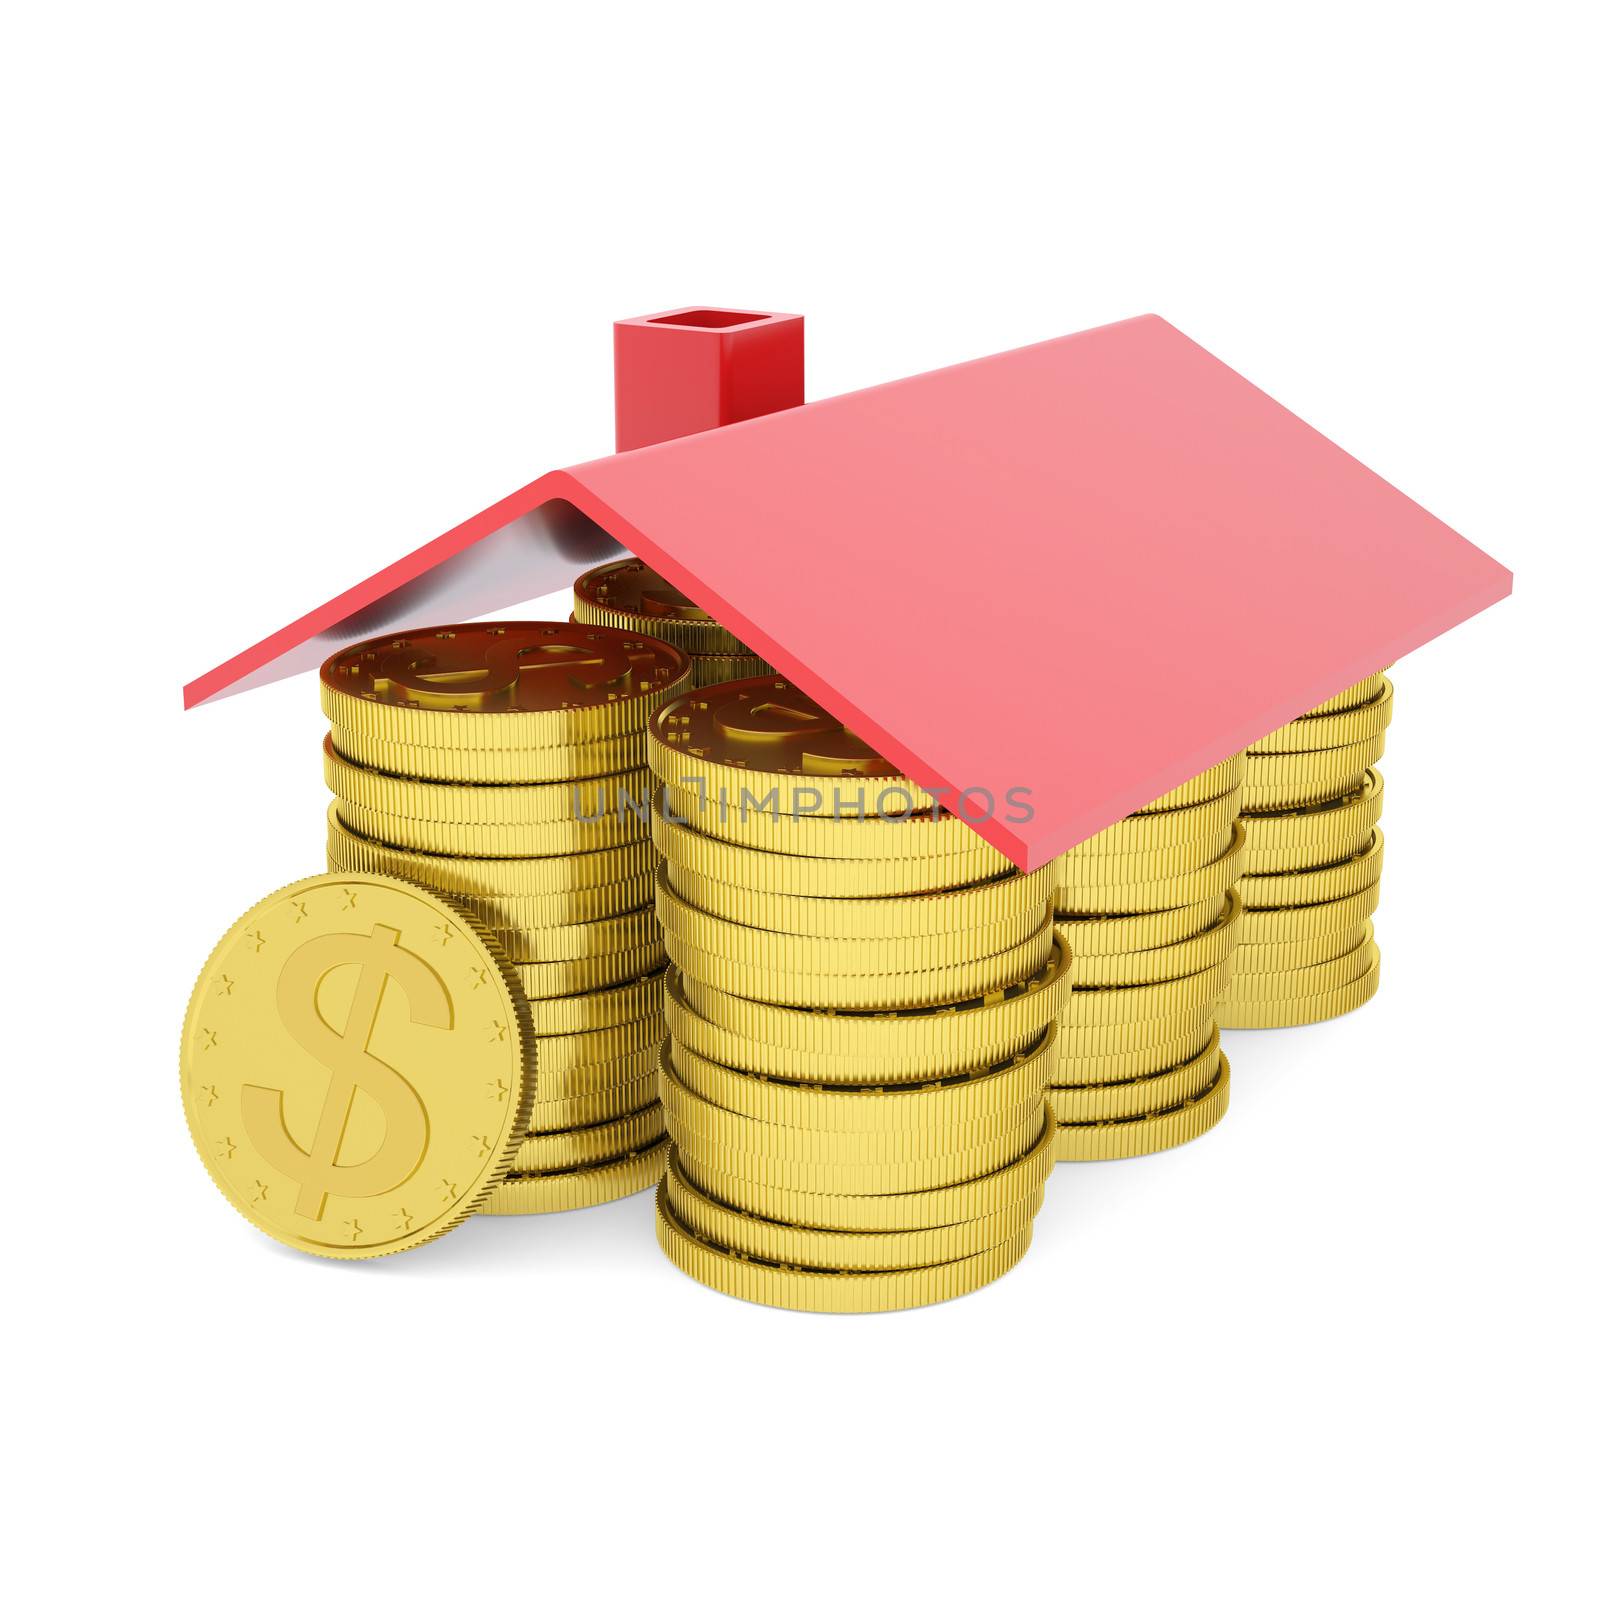 House of gold coins. Isolated render on a white background